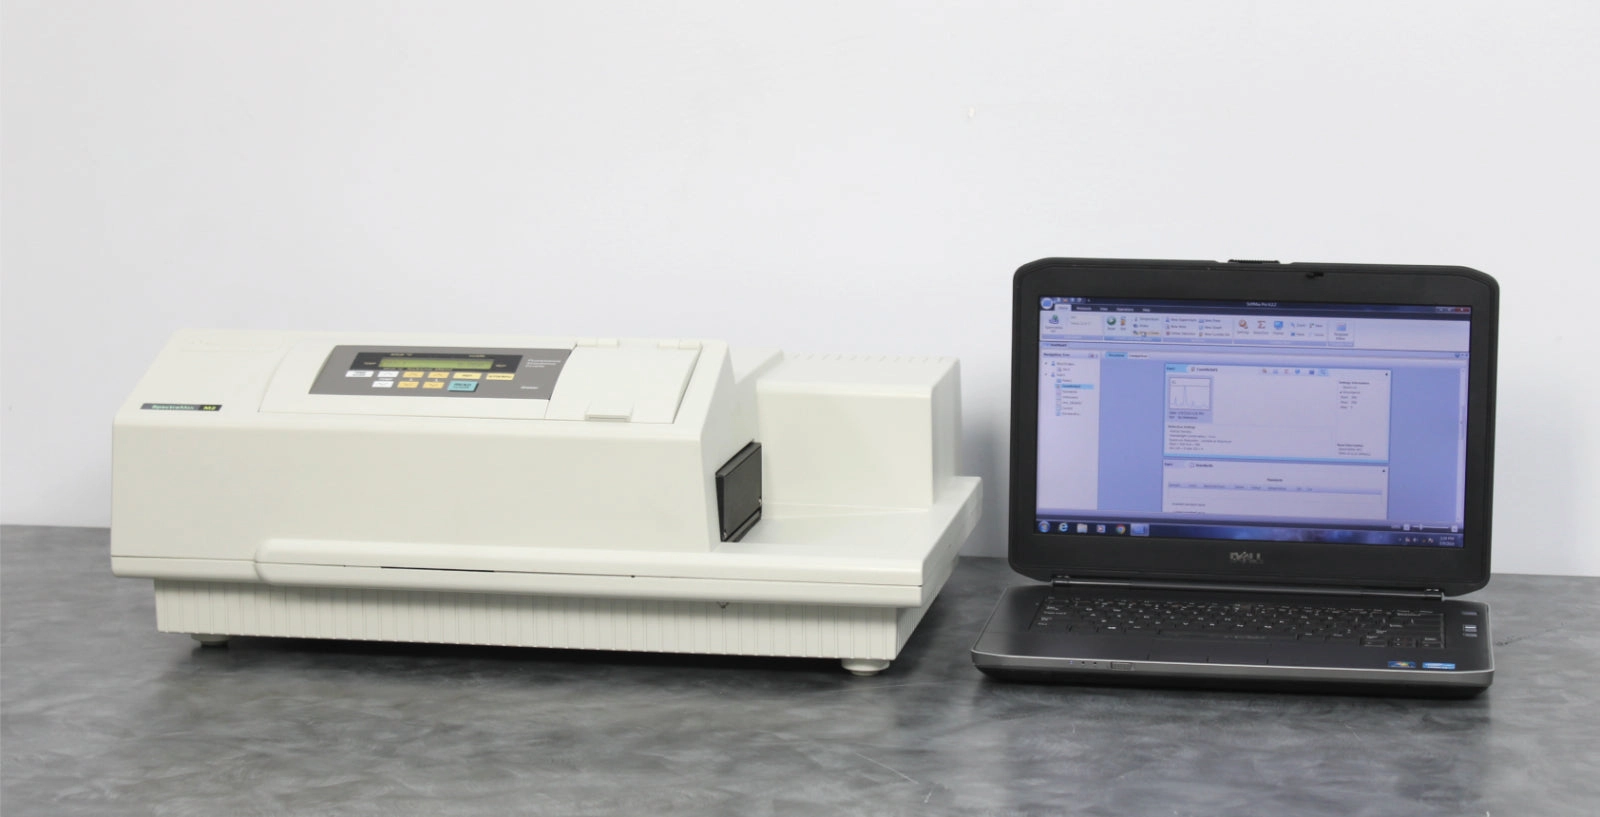 Molecular Devices SpectraMax M2 Multimode Cuvette Microplate Reader w/ Laptop